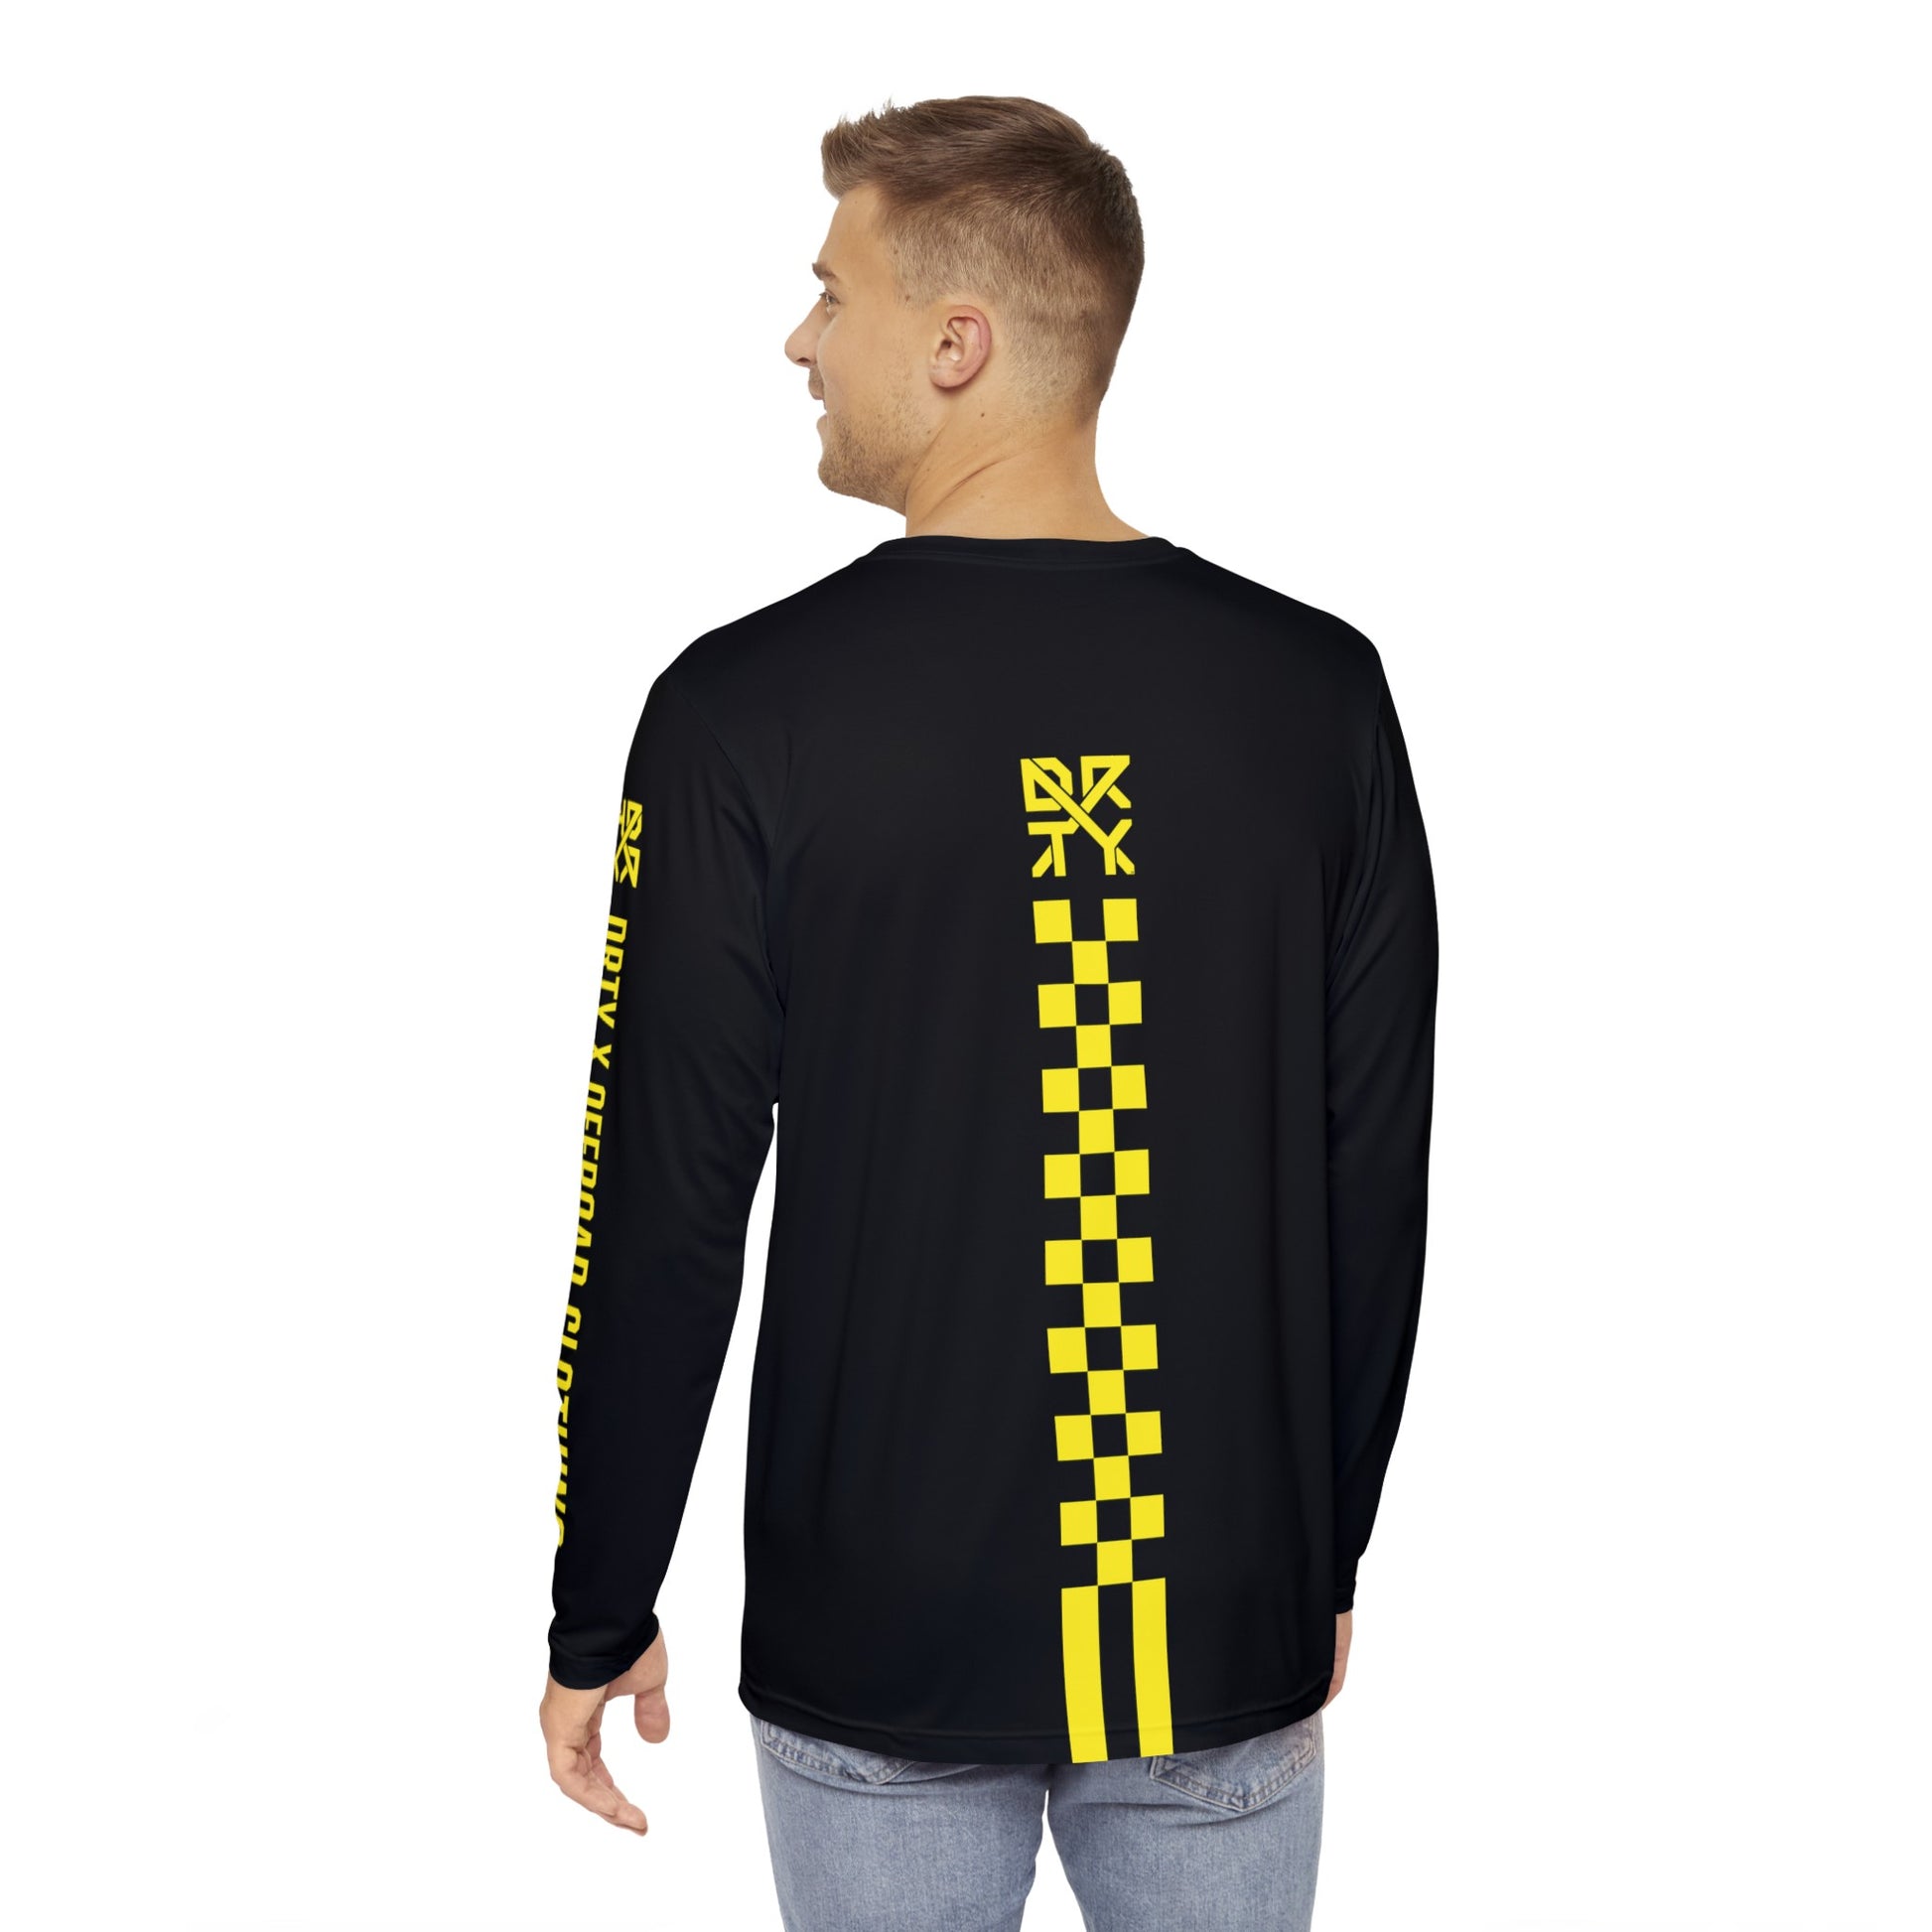 This image showcases the back view of a man wearing a long sleeve shirt with a small DRTY X Logo on the top middle  of the shirt with a checkered striped below the logo down the middle of the shirt.